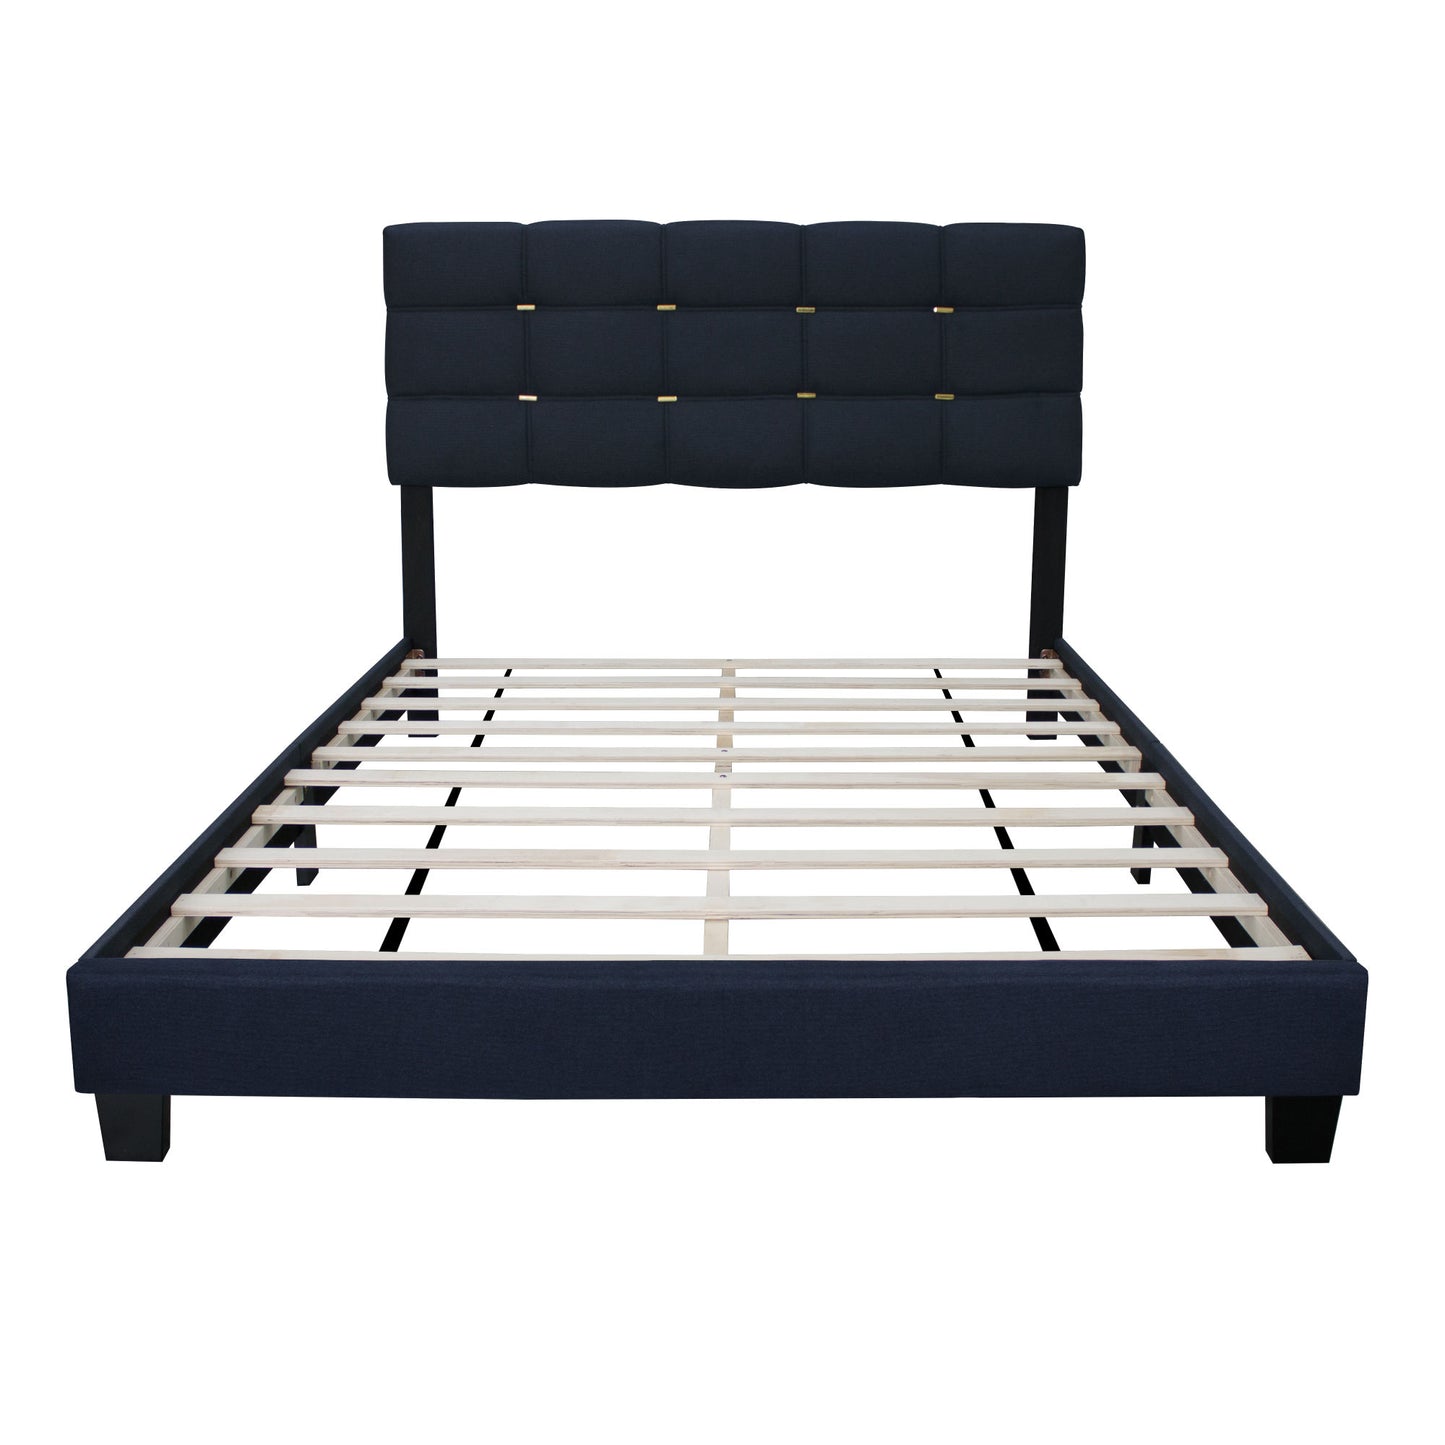 elegant upholstered bed frame with gold accents on headboard